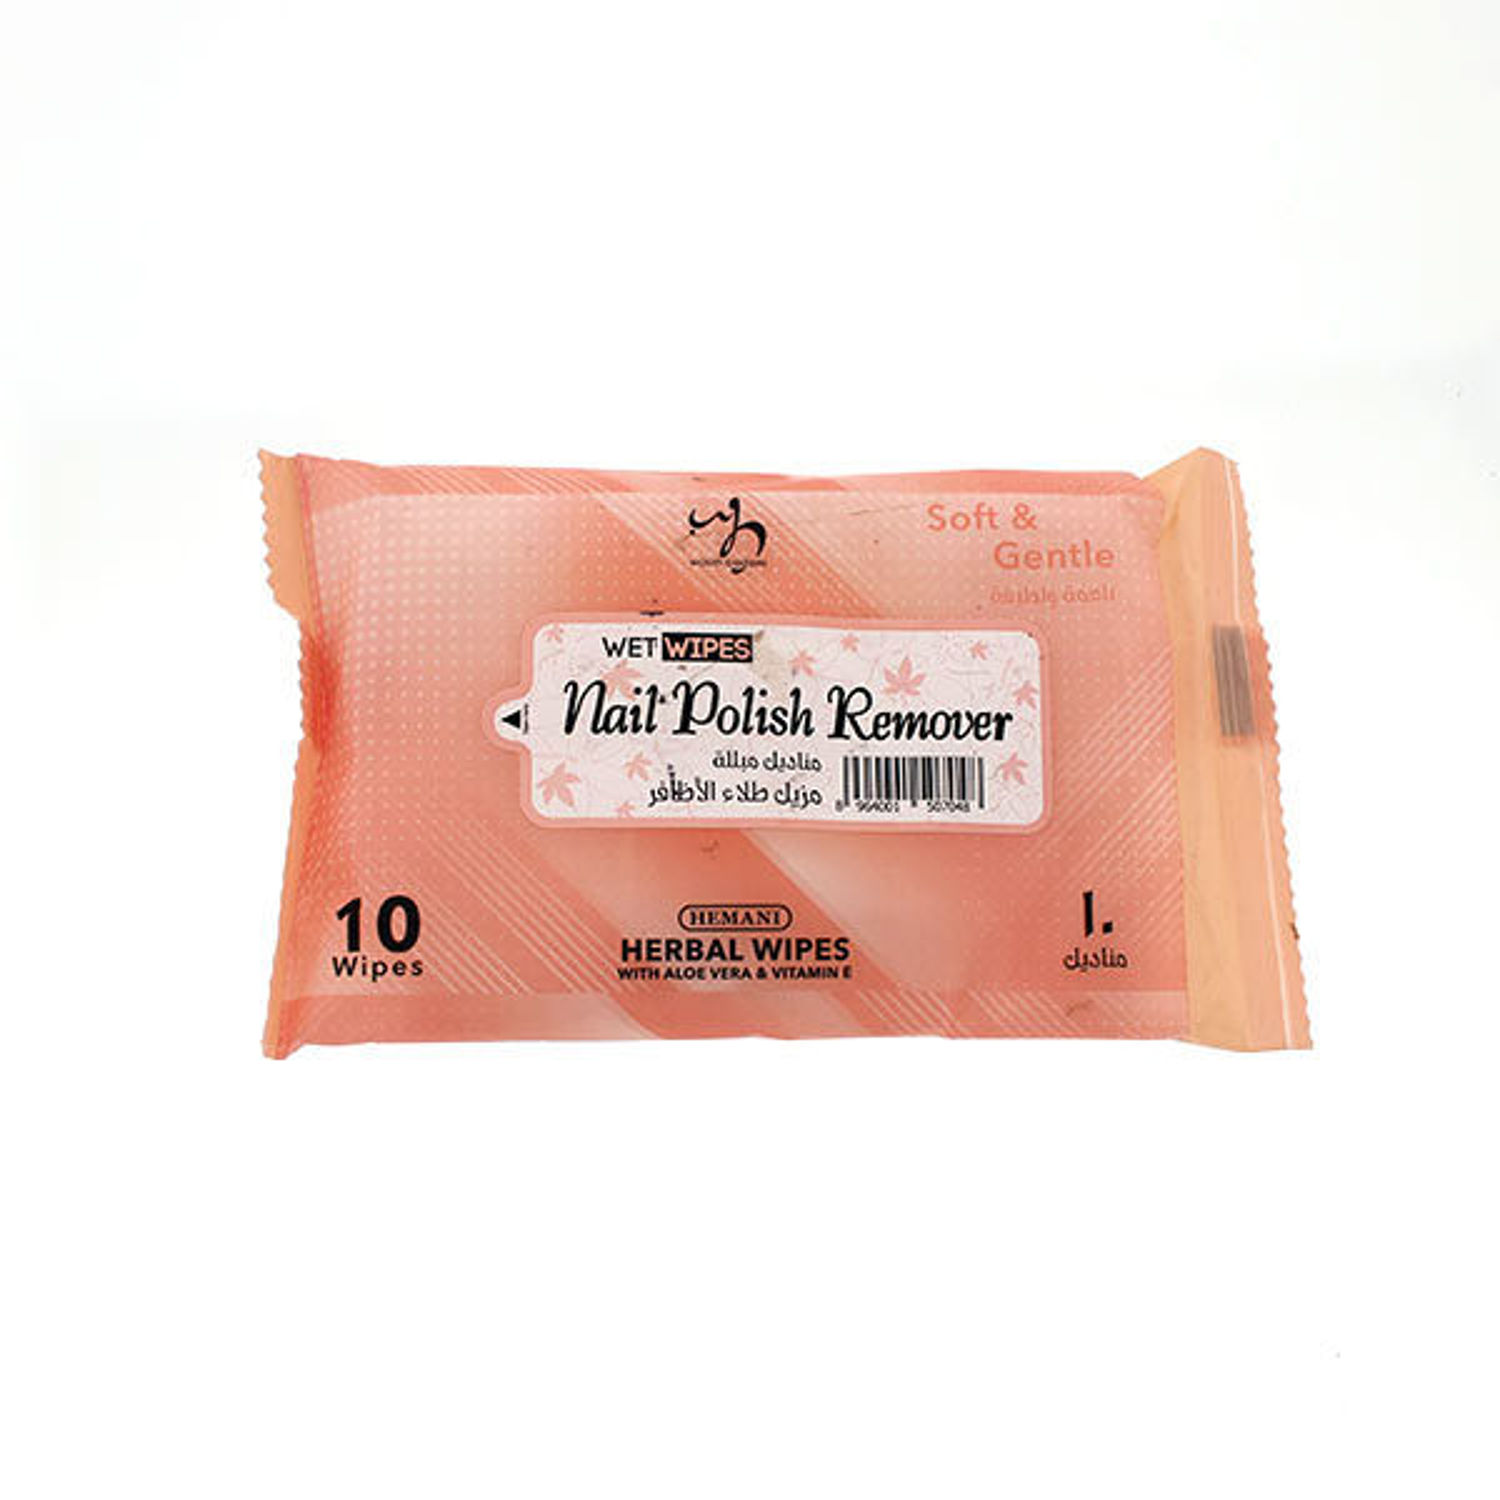 Nail Polisher Remover Wet Wipes